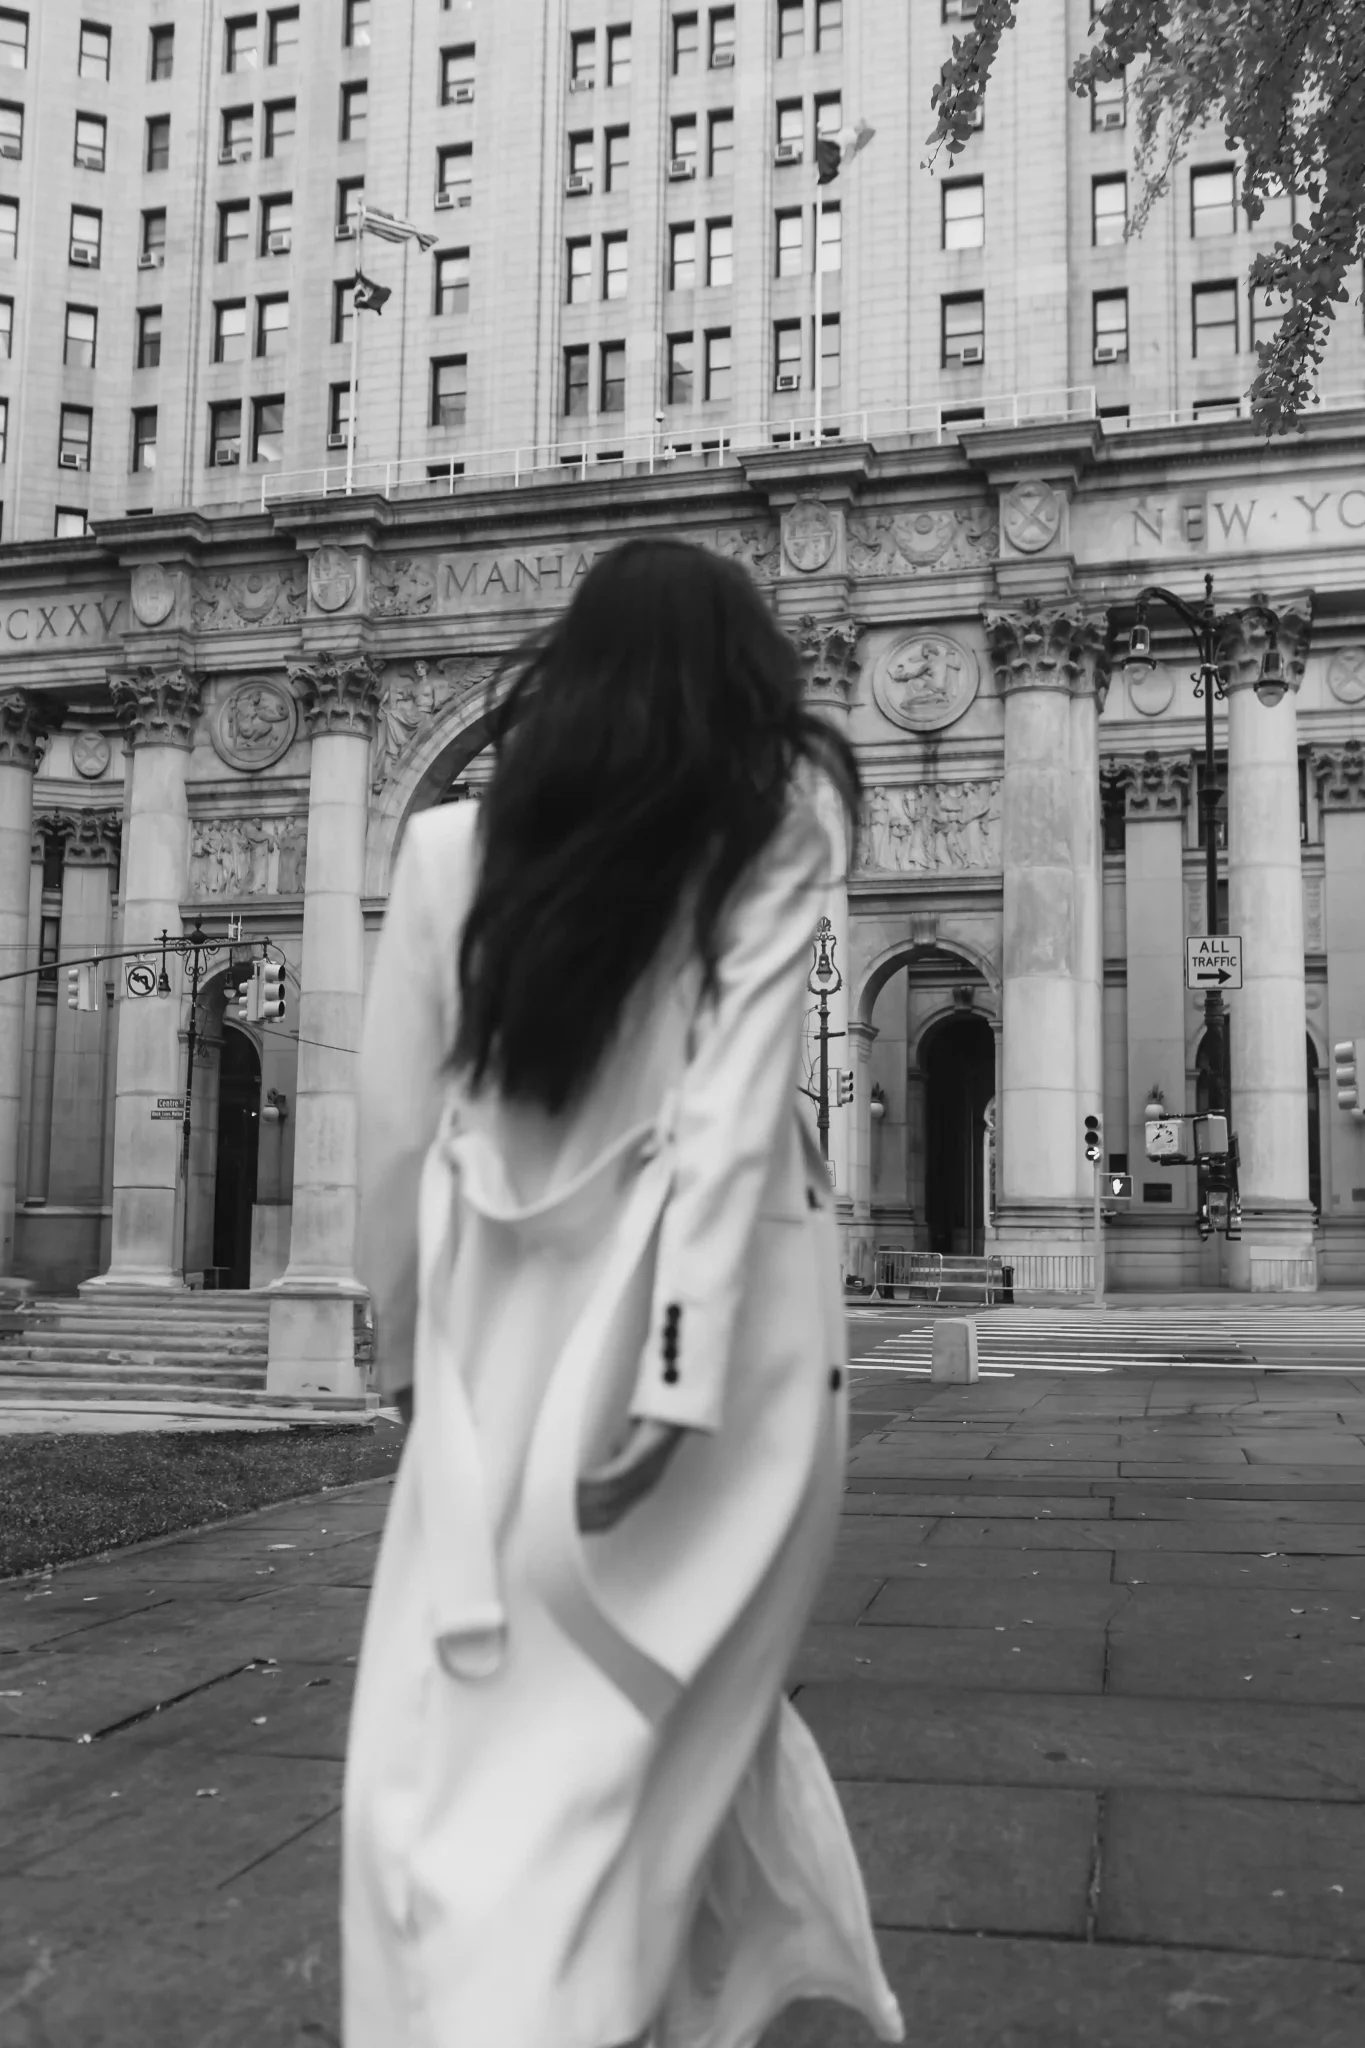 A woman in a white coat walking in front of a building.